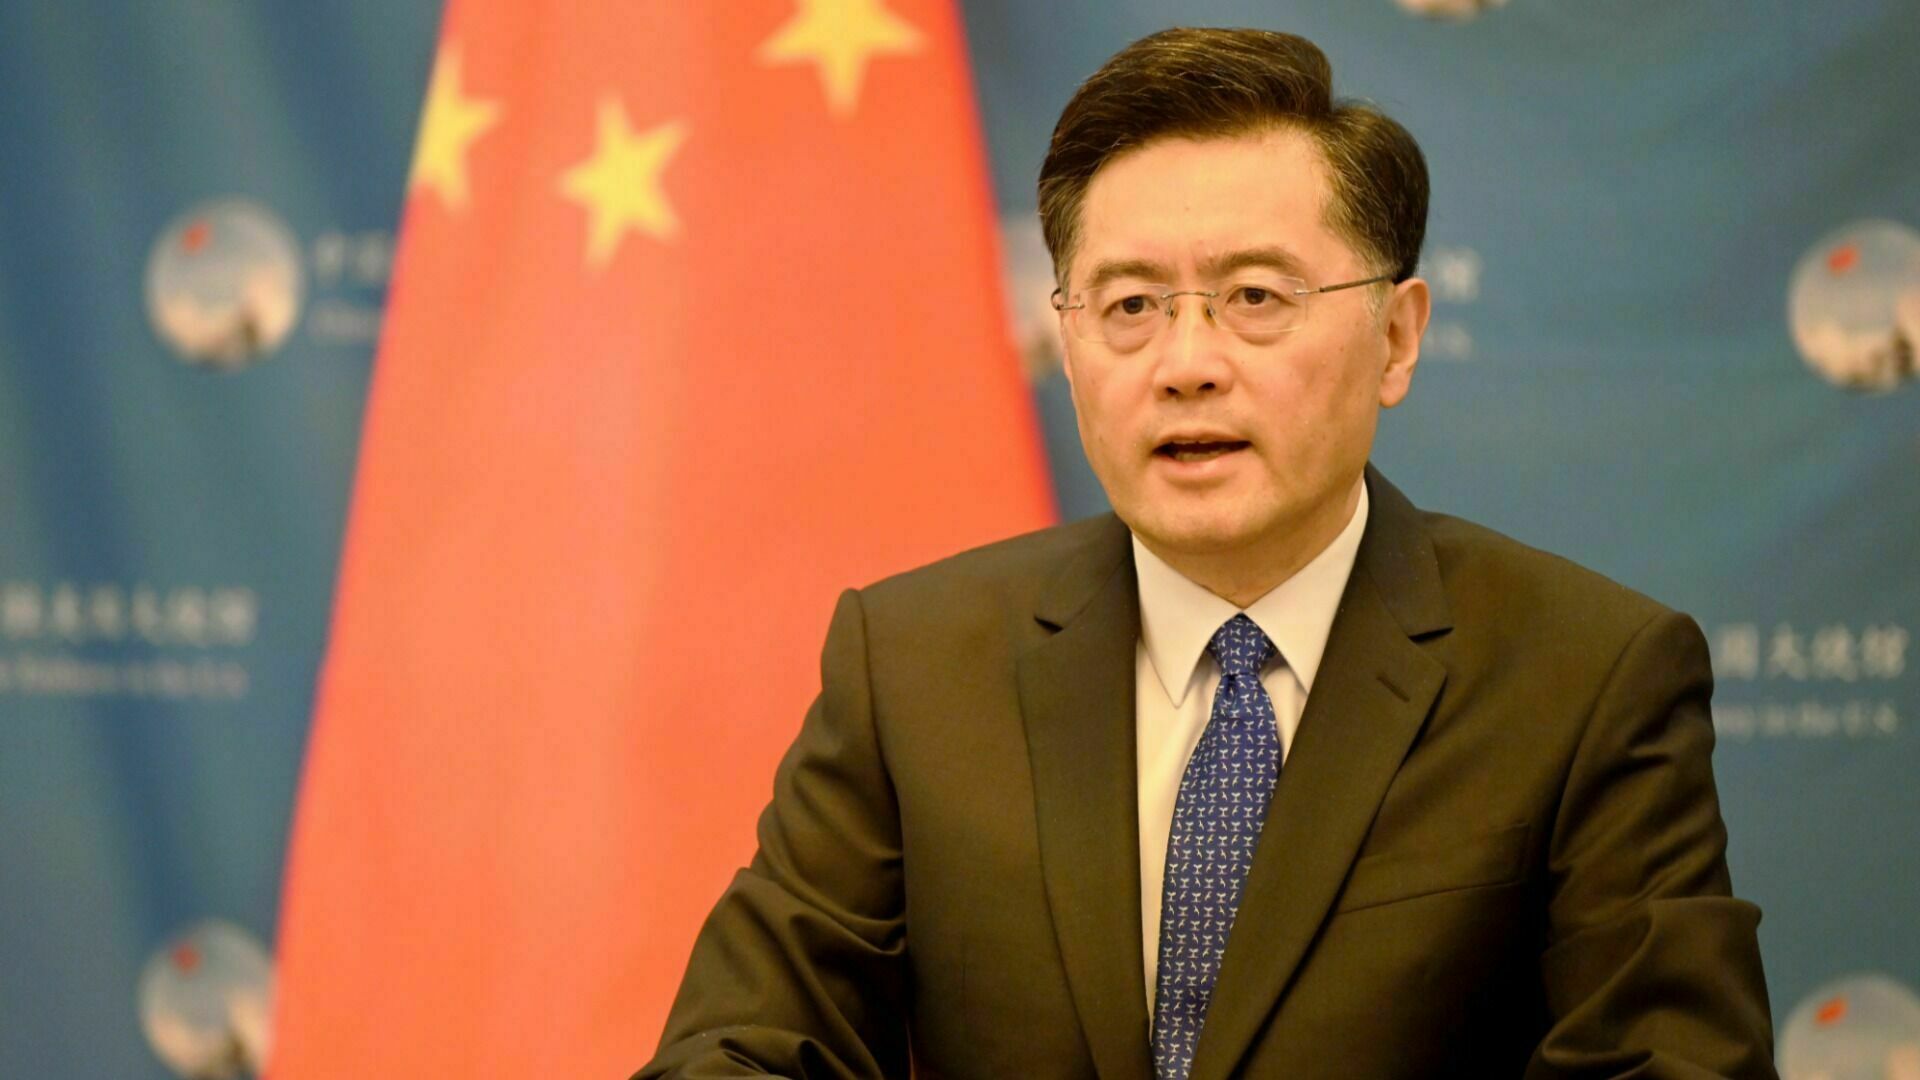 The brazen provocations of the United States cannot be endlessly tolerated, Chinese Foreign Minister Qin warned